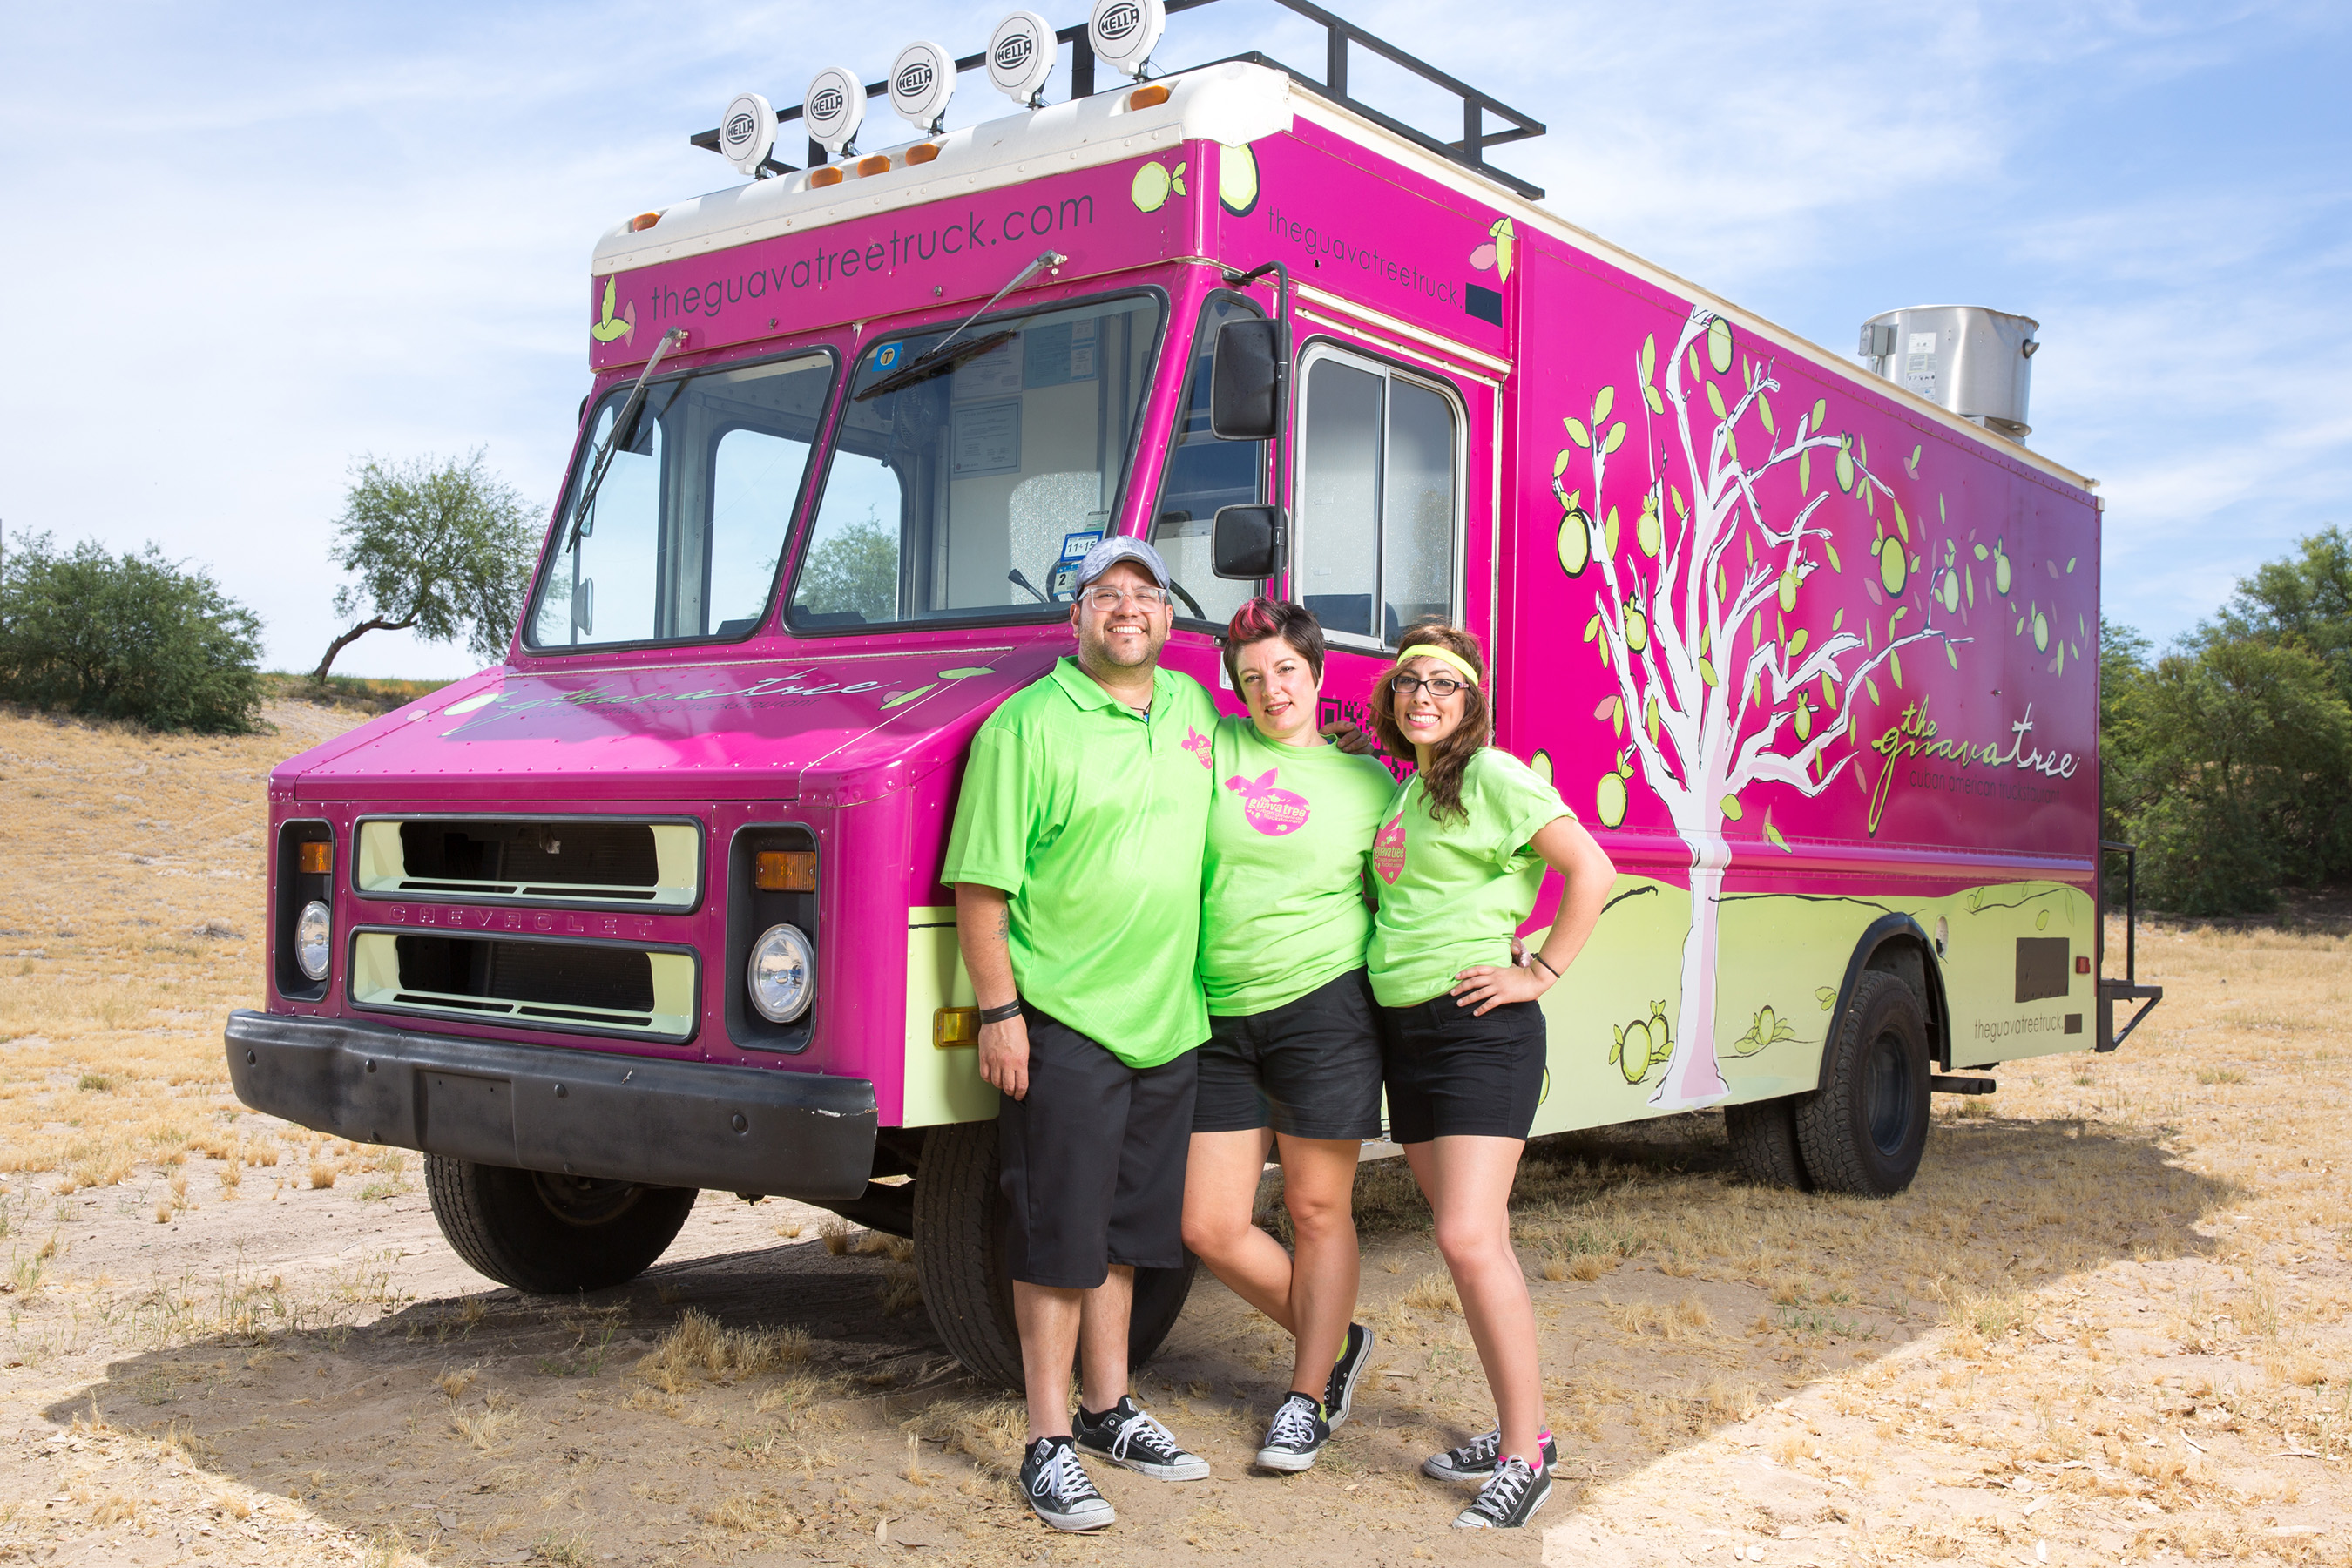 The Guava Tree Truck Team, Competitors on Season 6 of The Great Food Truck Race